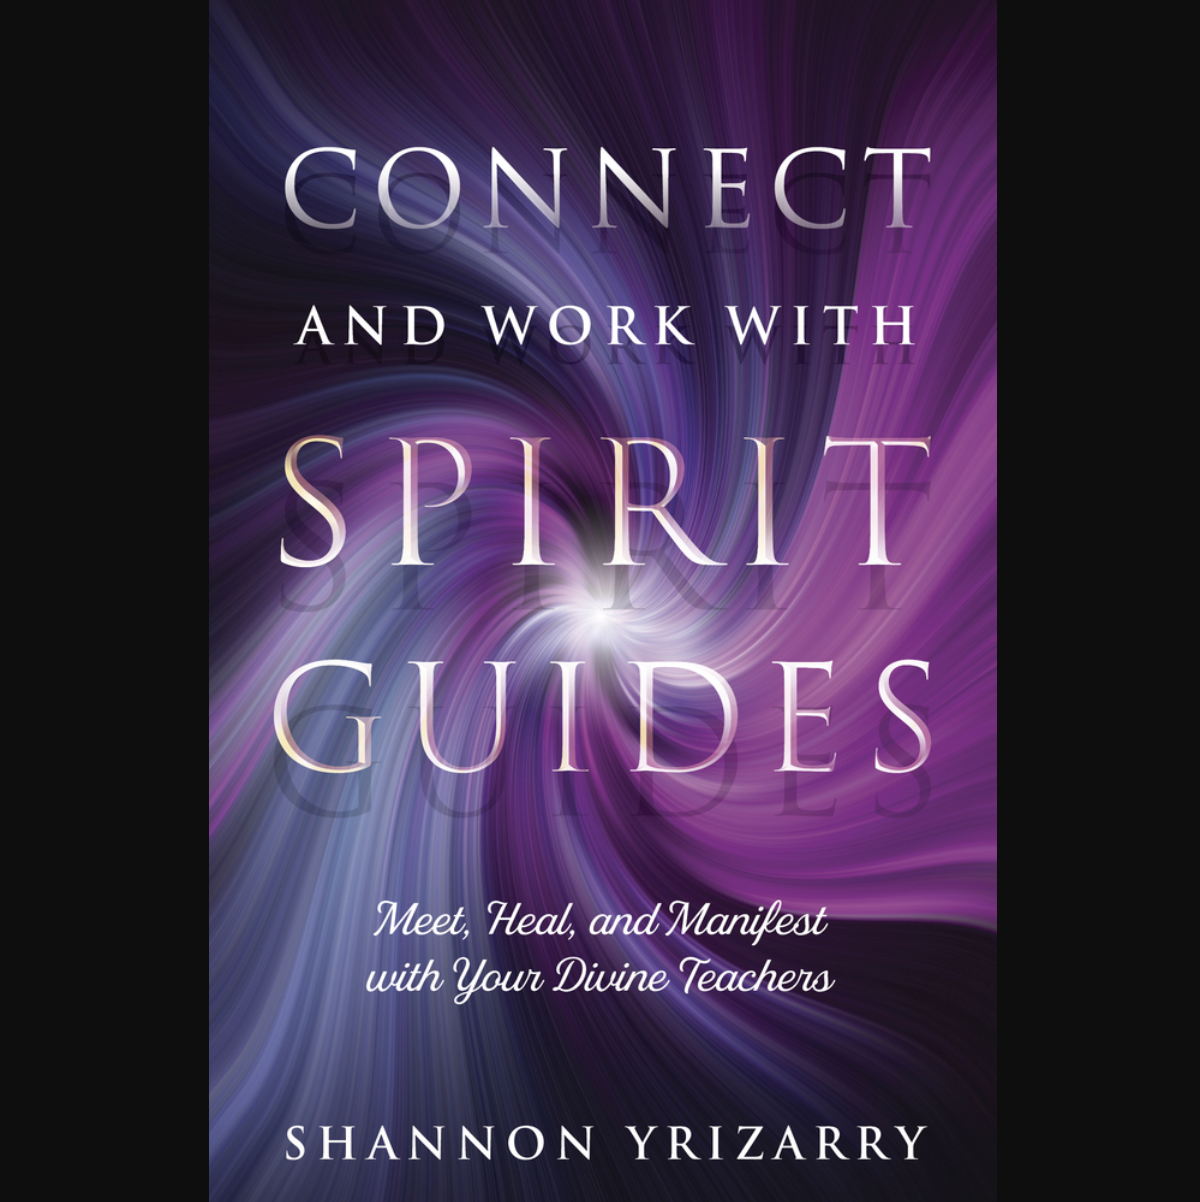 Connect and Work With Spirit Guides Book by Shannon Yrizarry